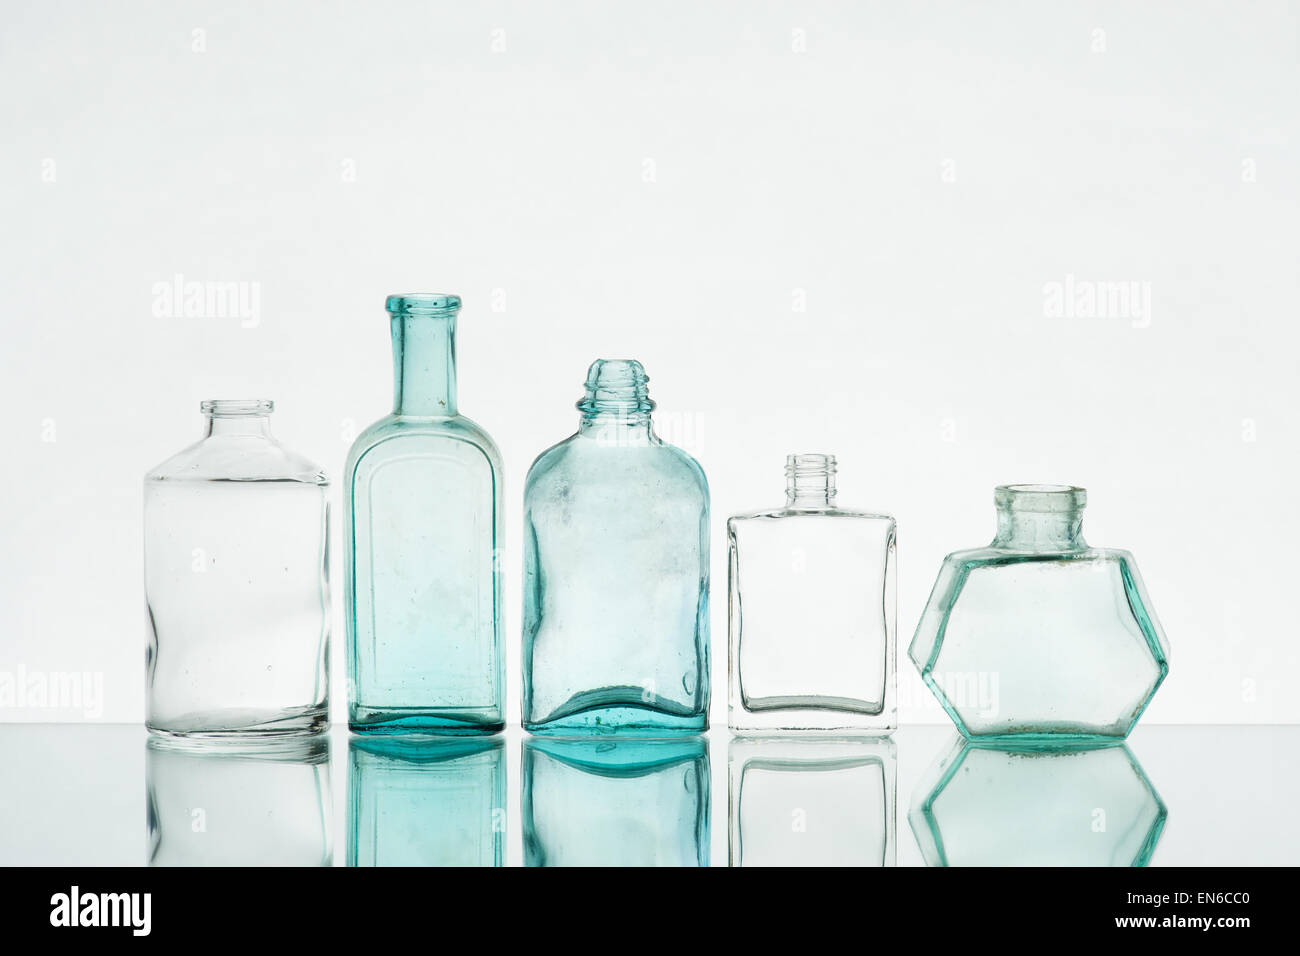 Composition of various vintage bottles on the light background Stock Photo